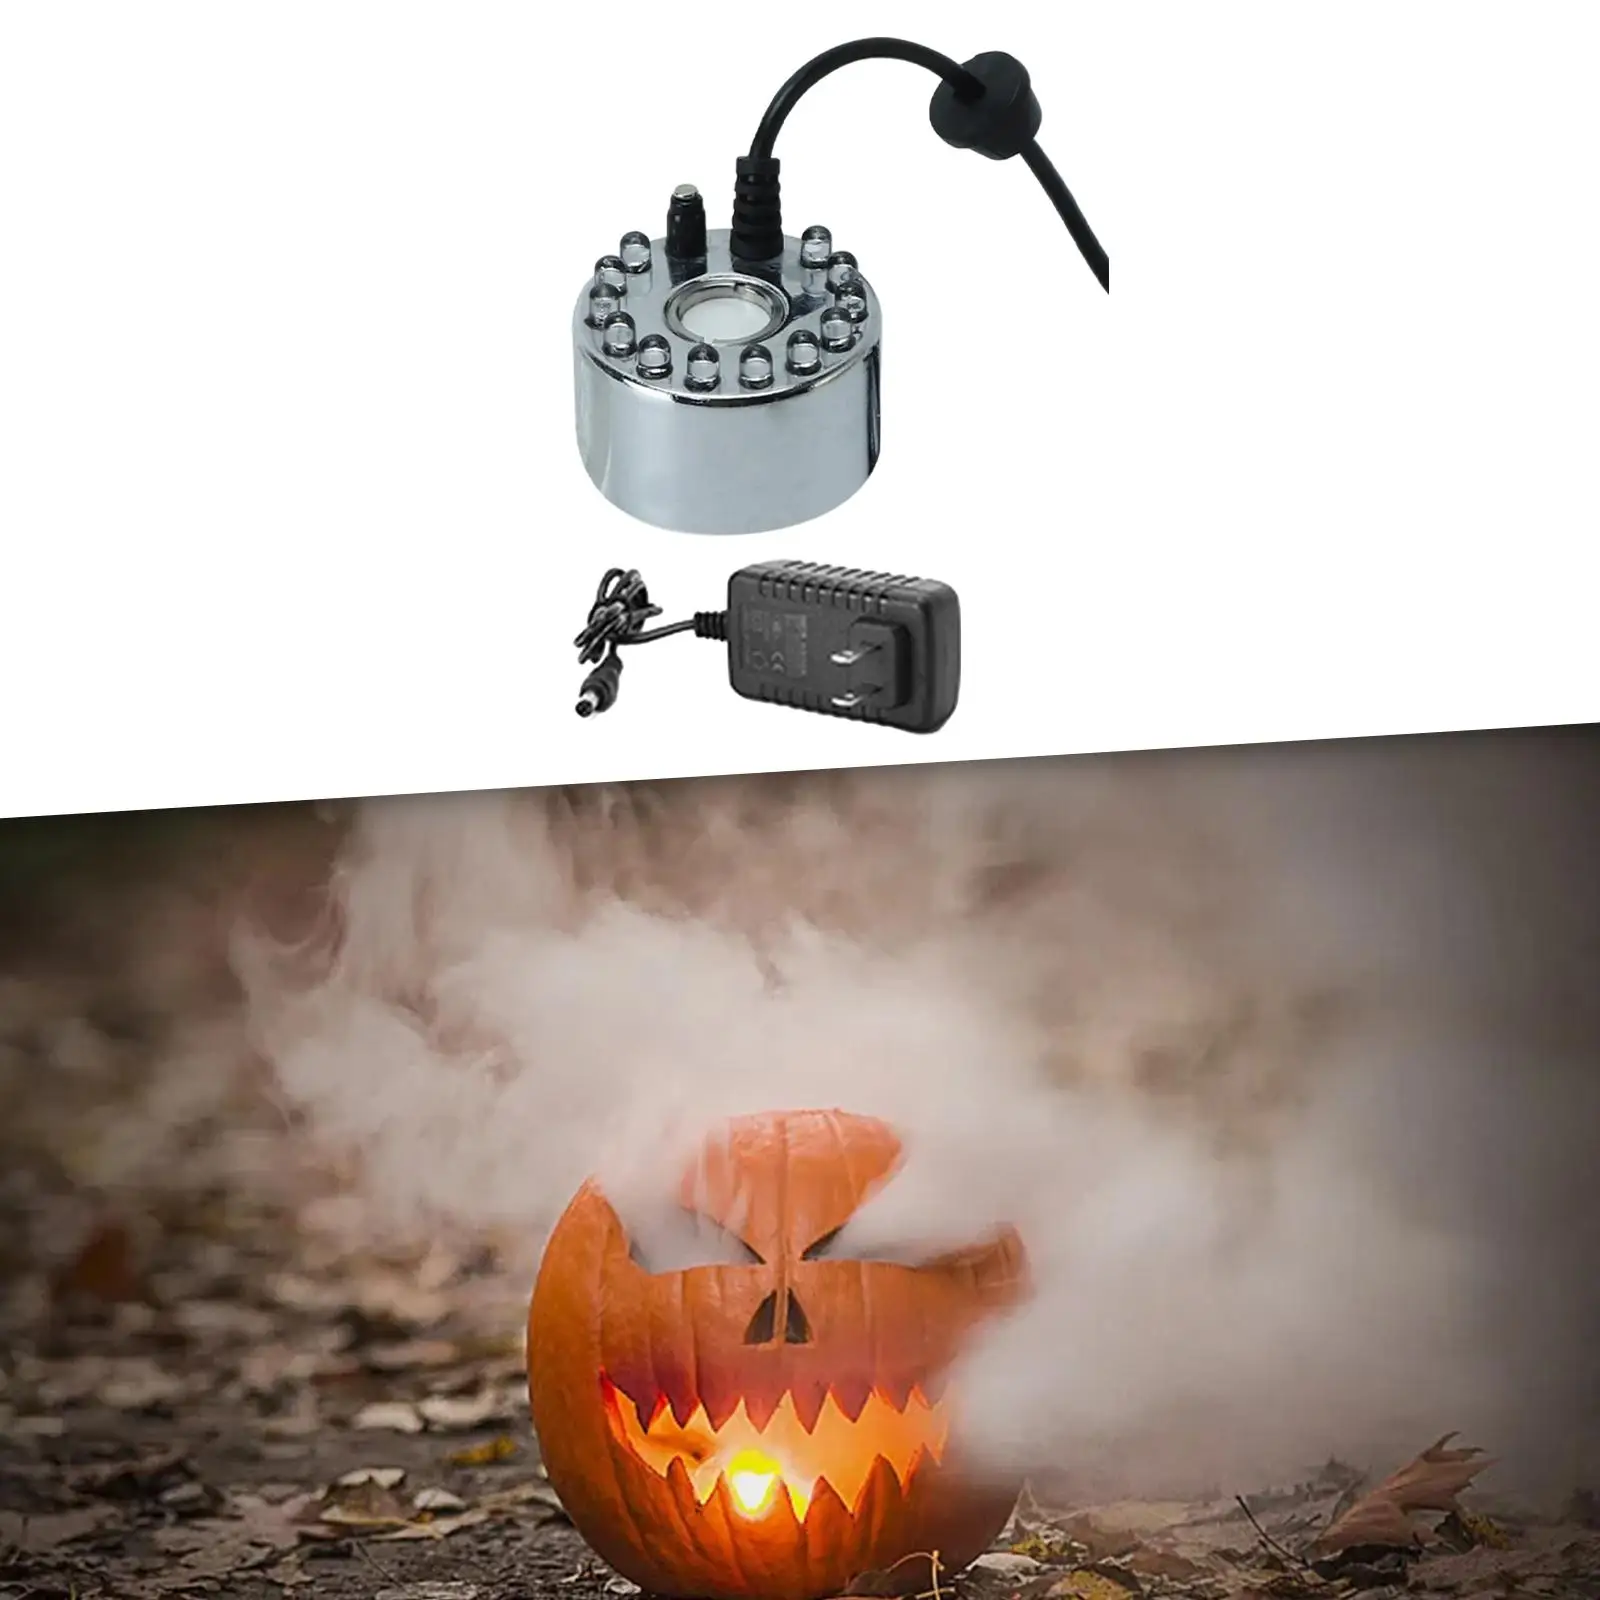 Pond Fog Machine Atomizer Air Humidifier 12 Lights US 110V Plug Multifunctional Sturdy Color Changing for Halloween